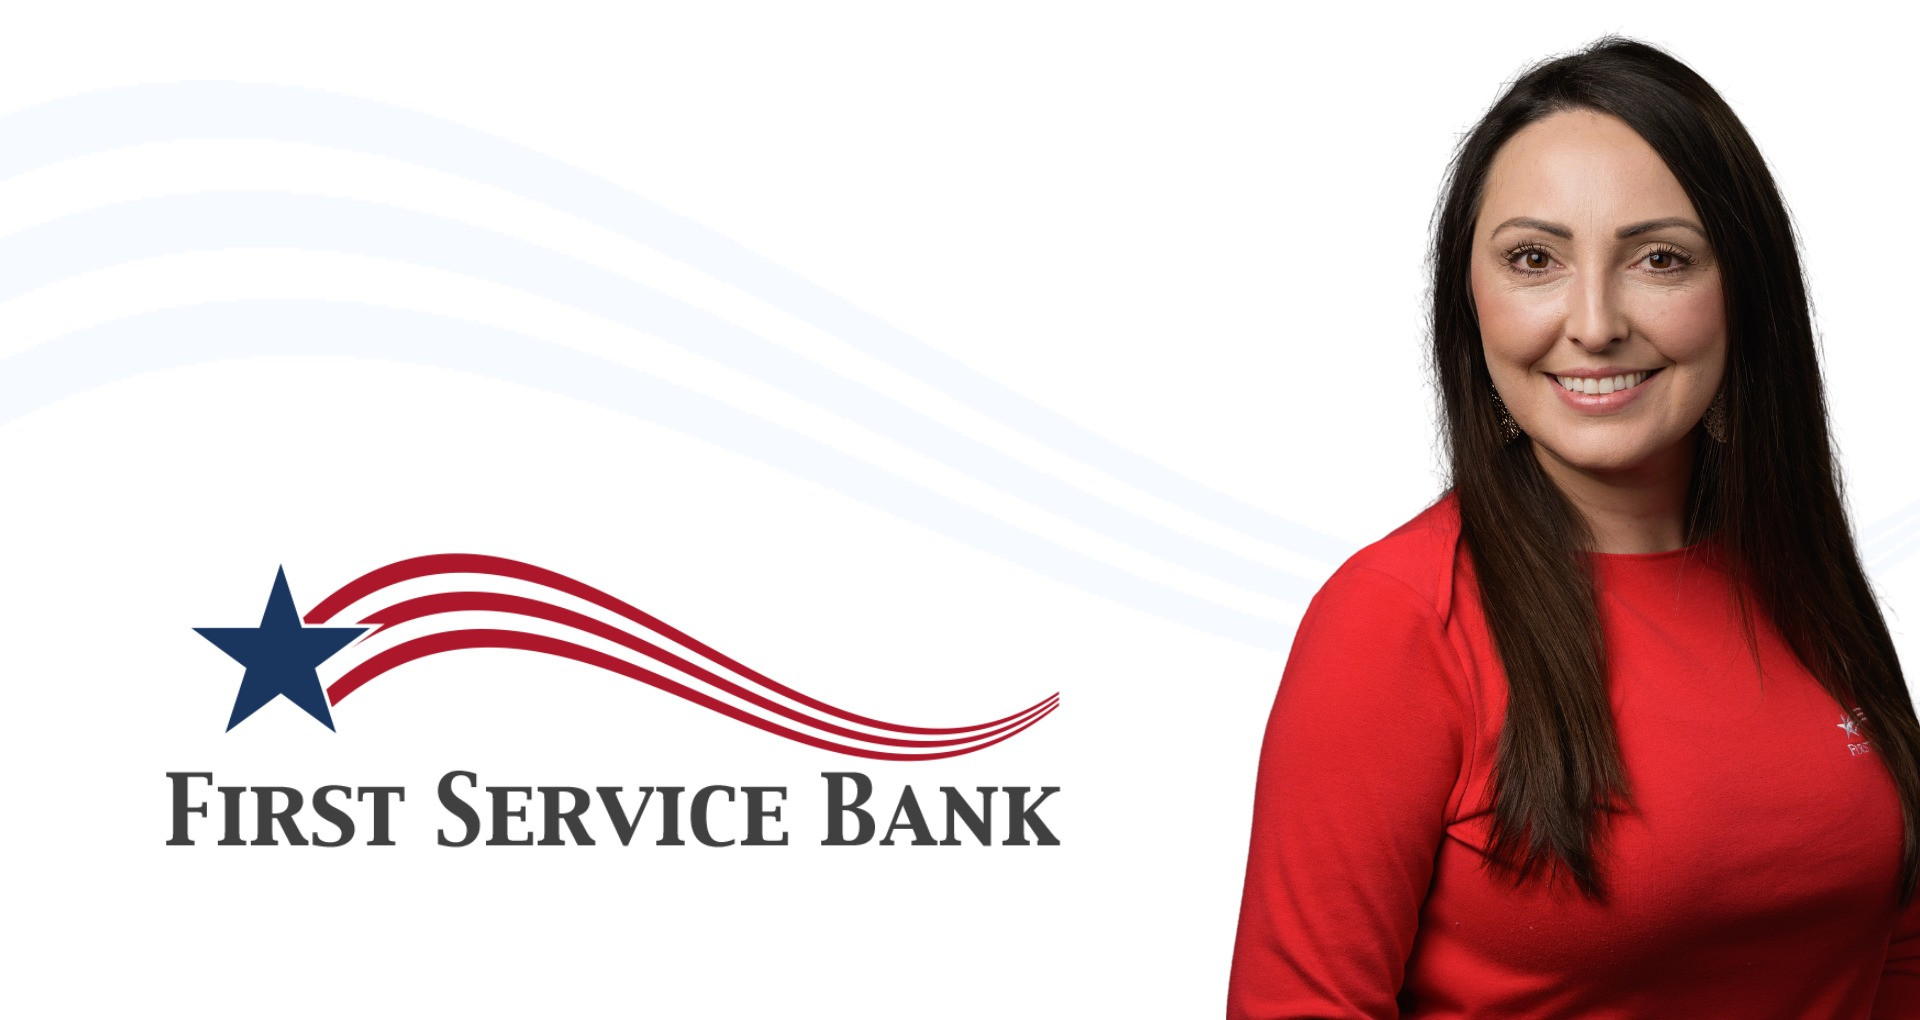 Laura Stumbaugh Promoted to Greenbrier Assistant Branch Manager at First Service Bank